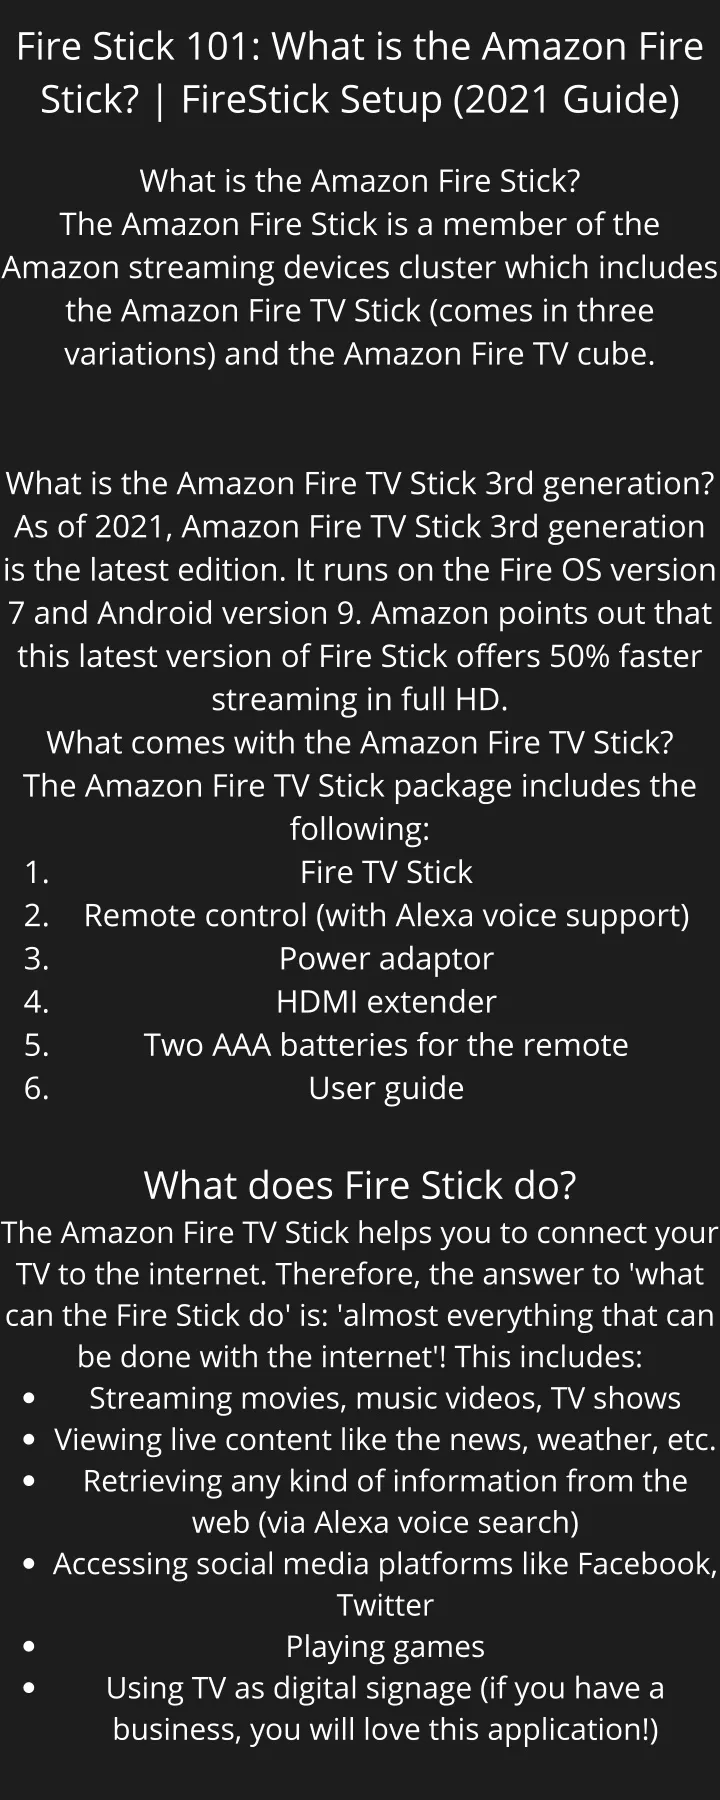 fire stick 101 what is the amazon fire stick